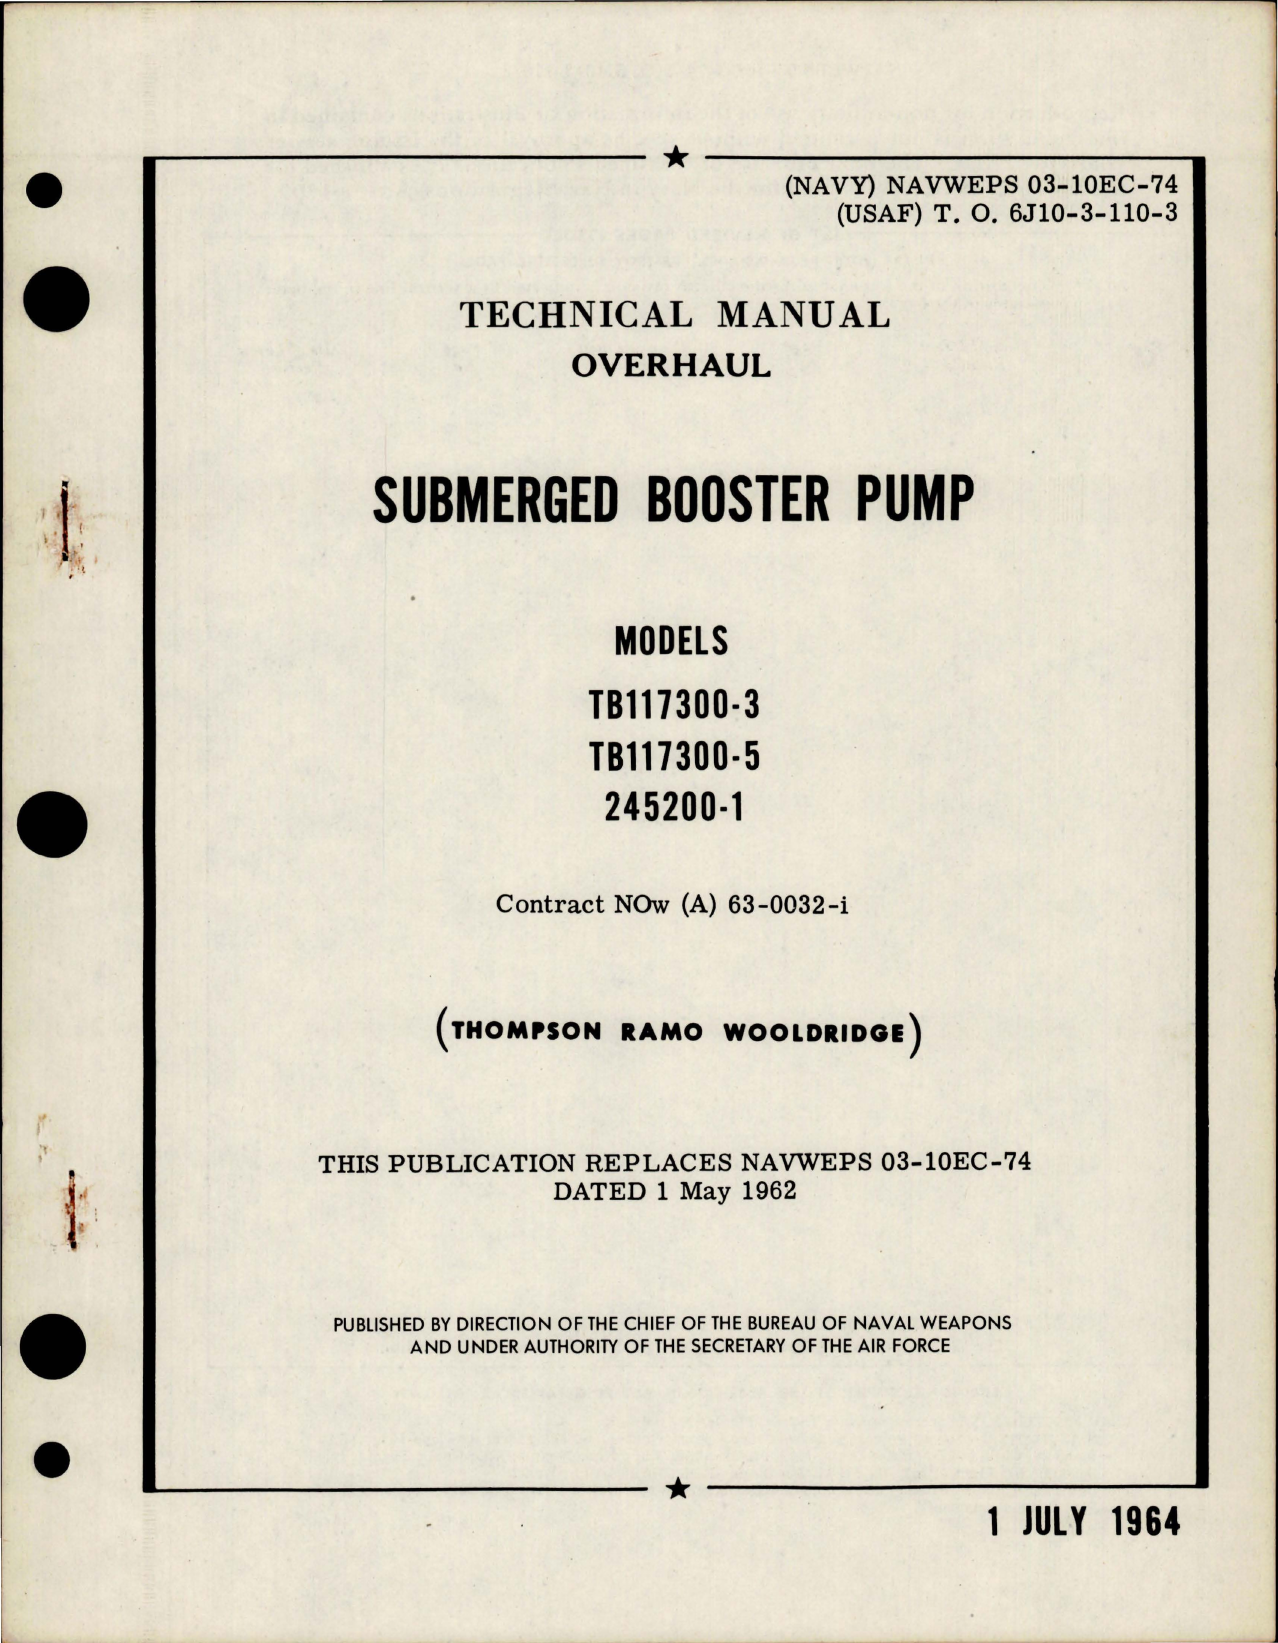 Sample page 1 from AirCorps Library document: Overhaul Instructions for Submerged Booster Pump - Models TB117300-3, TB117300-5, and 245200-1 